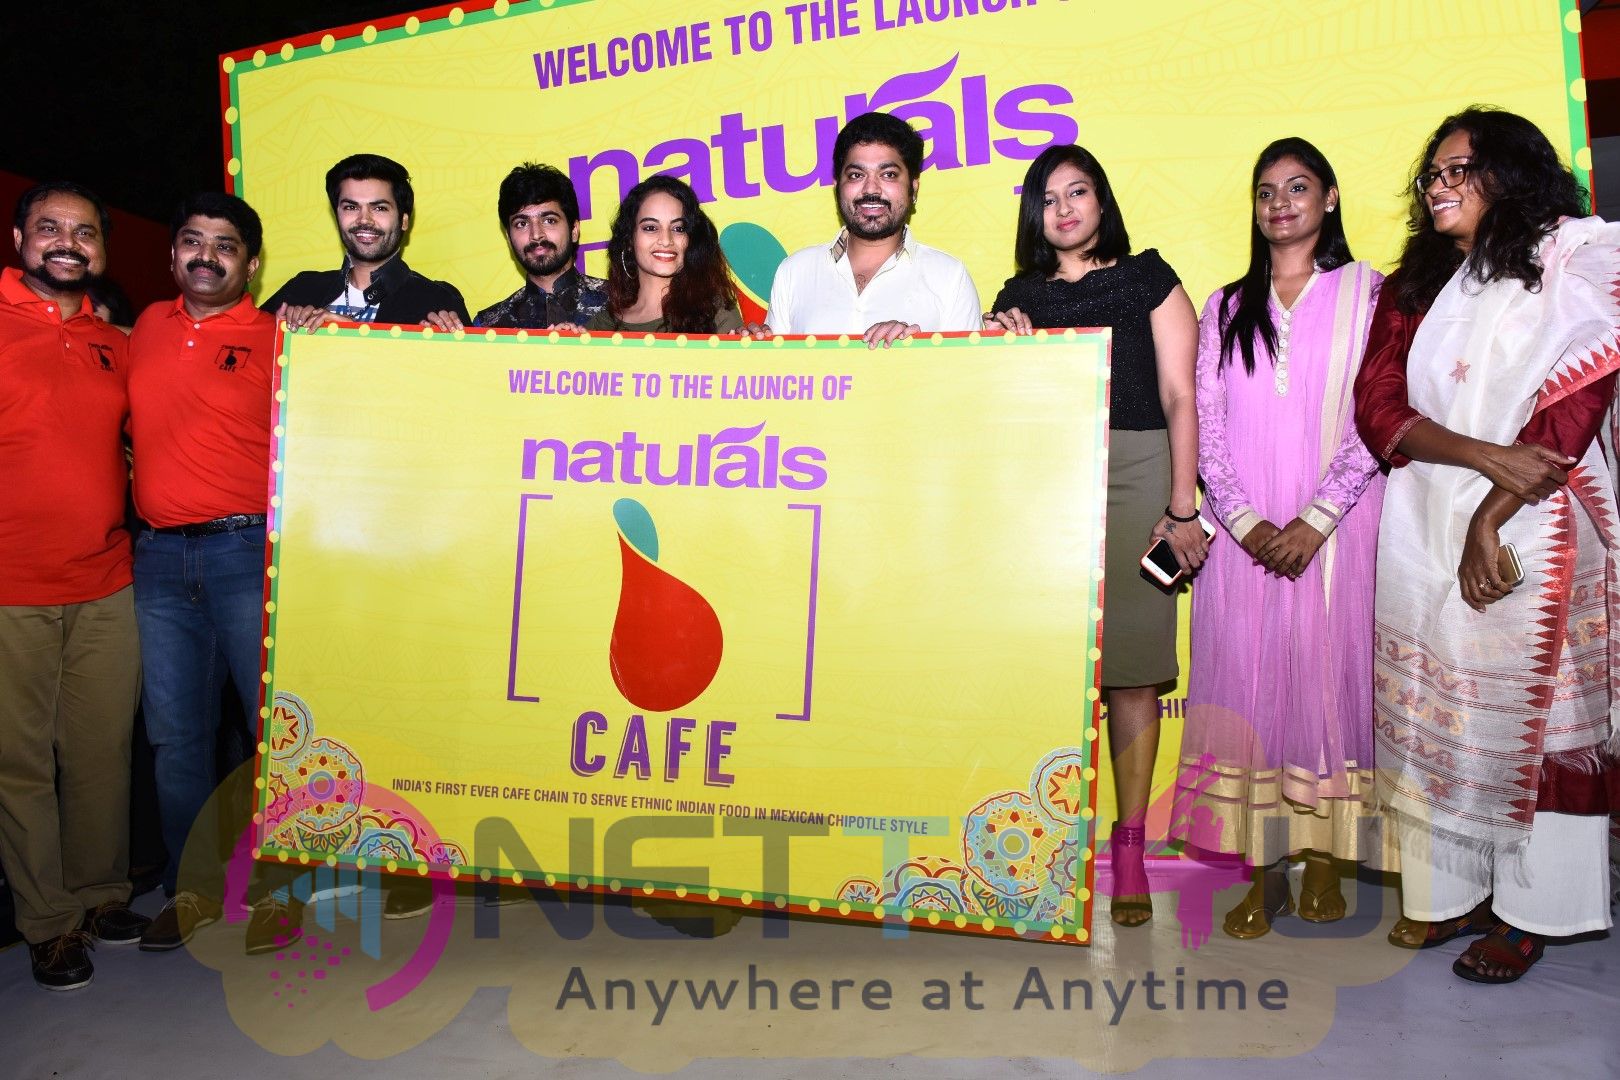 Bigg Boss Contestants Launched Naturals B Cafe Pics Tamil Gallery